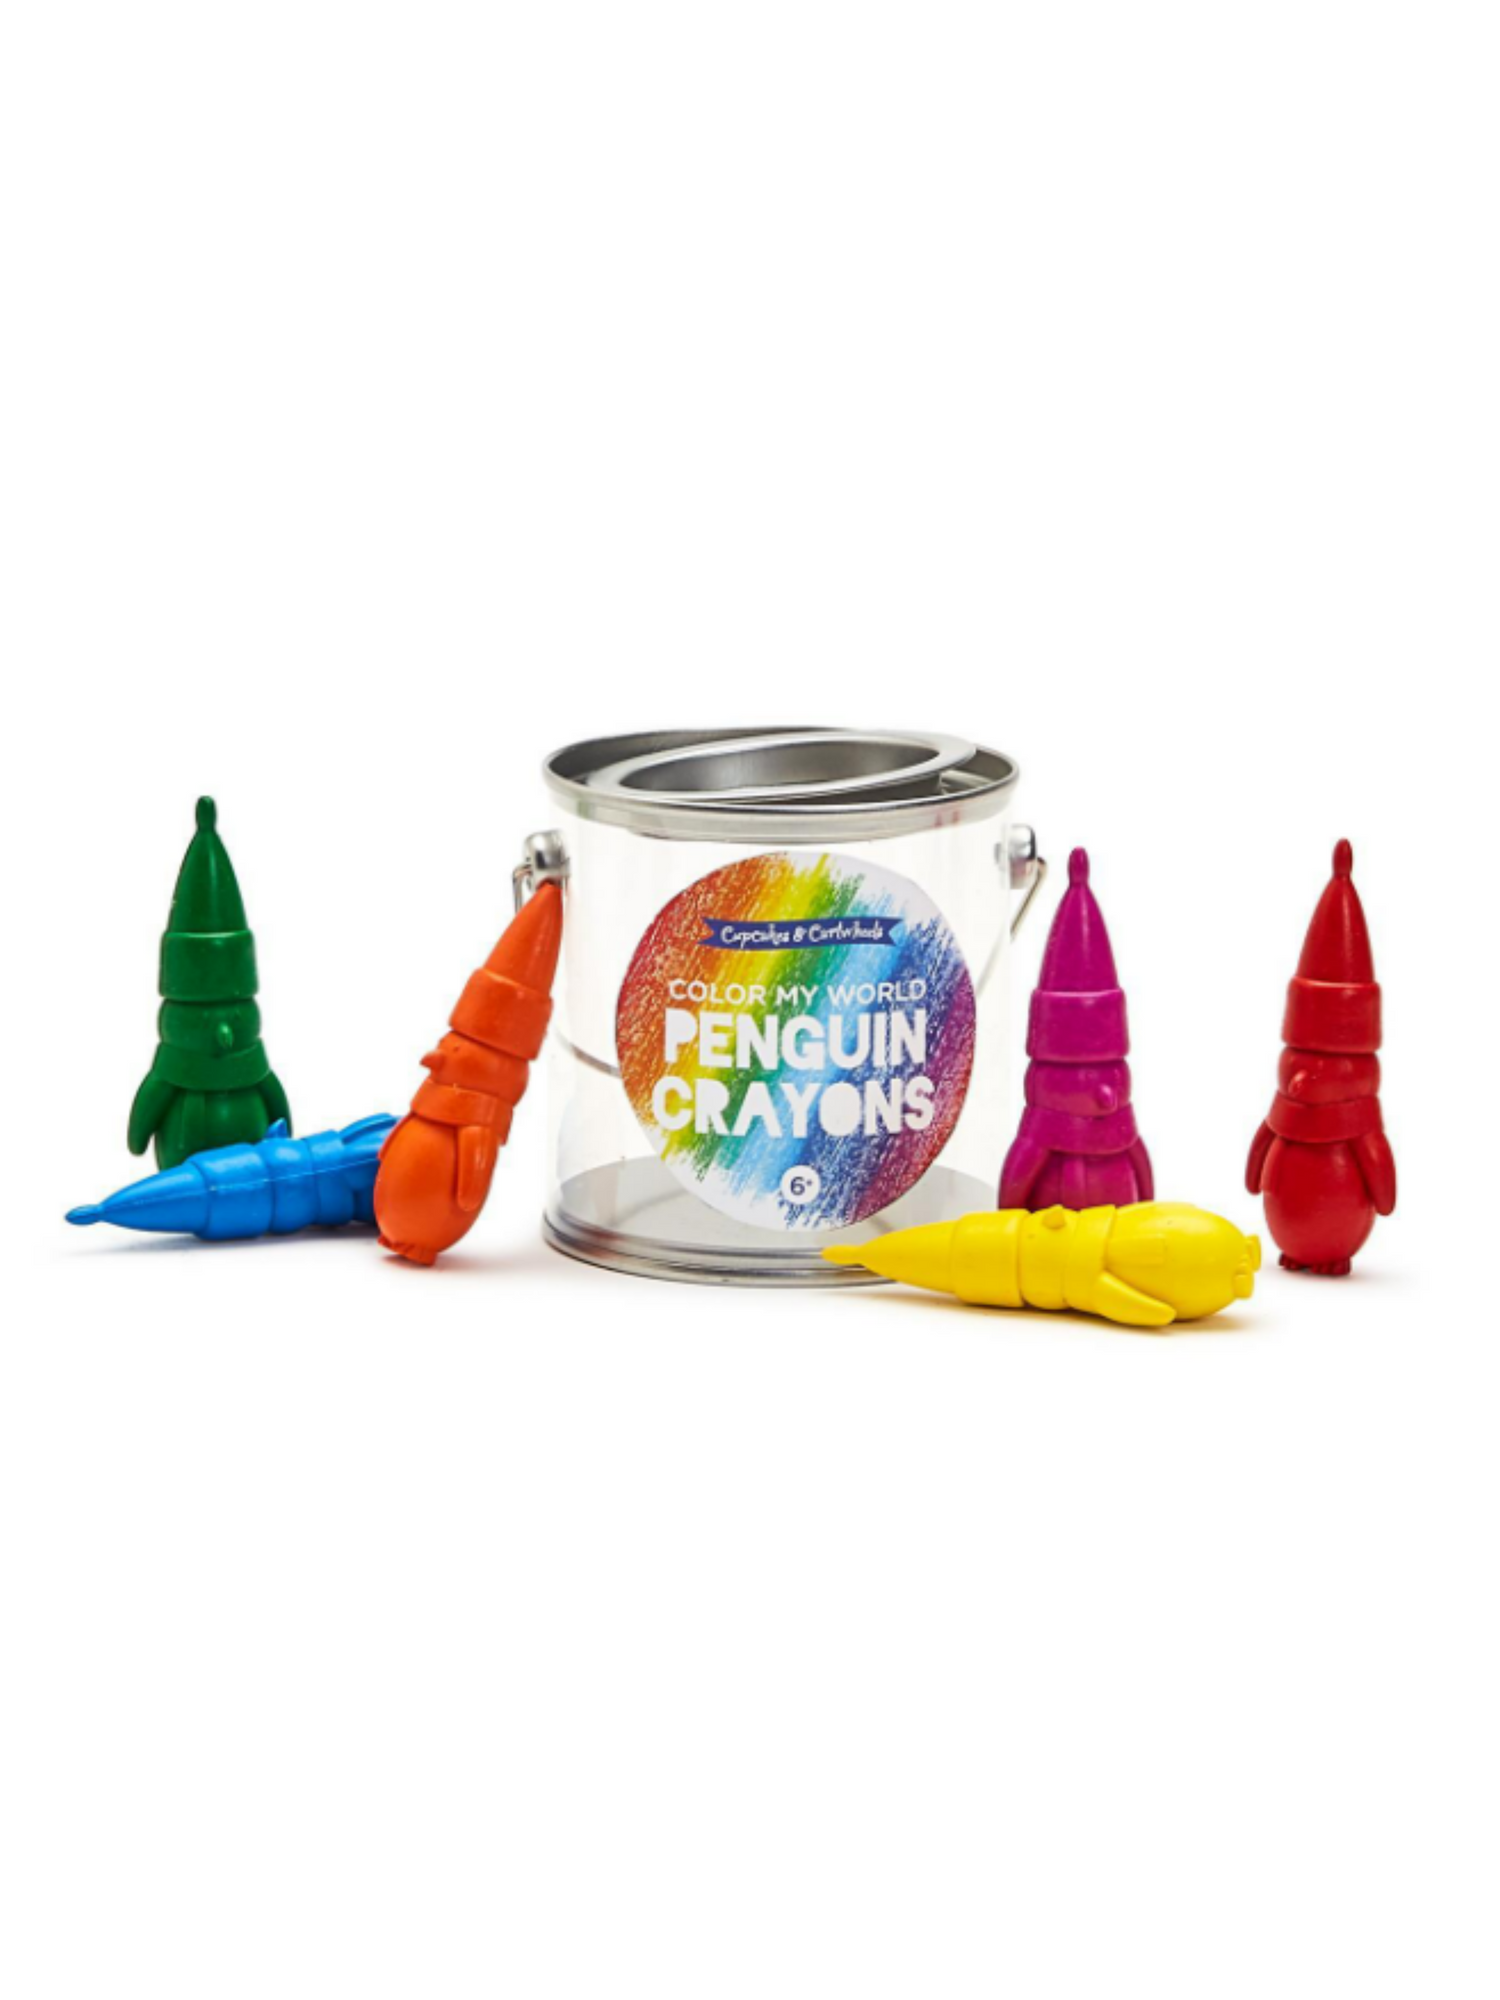 COLOR MY WORLD PENGUIN CRAYONS - THE HIP EAGLE BOUTIQUE